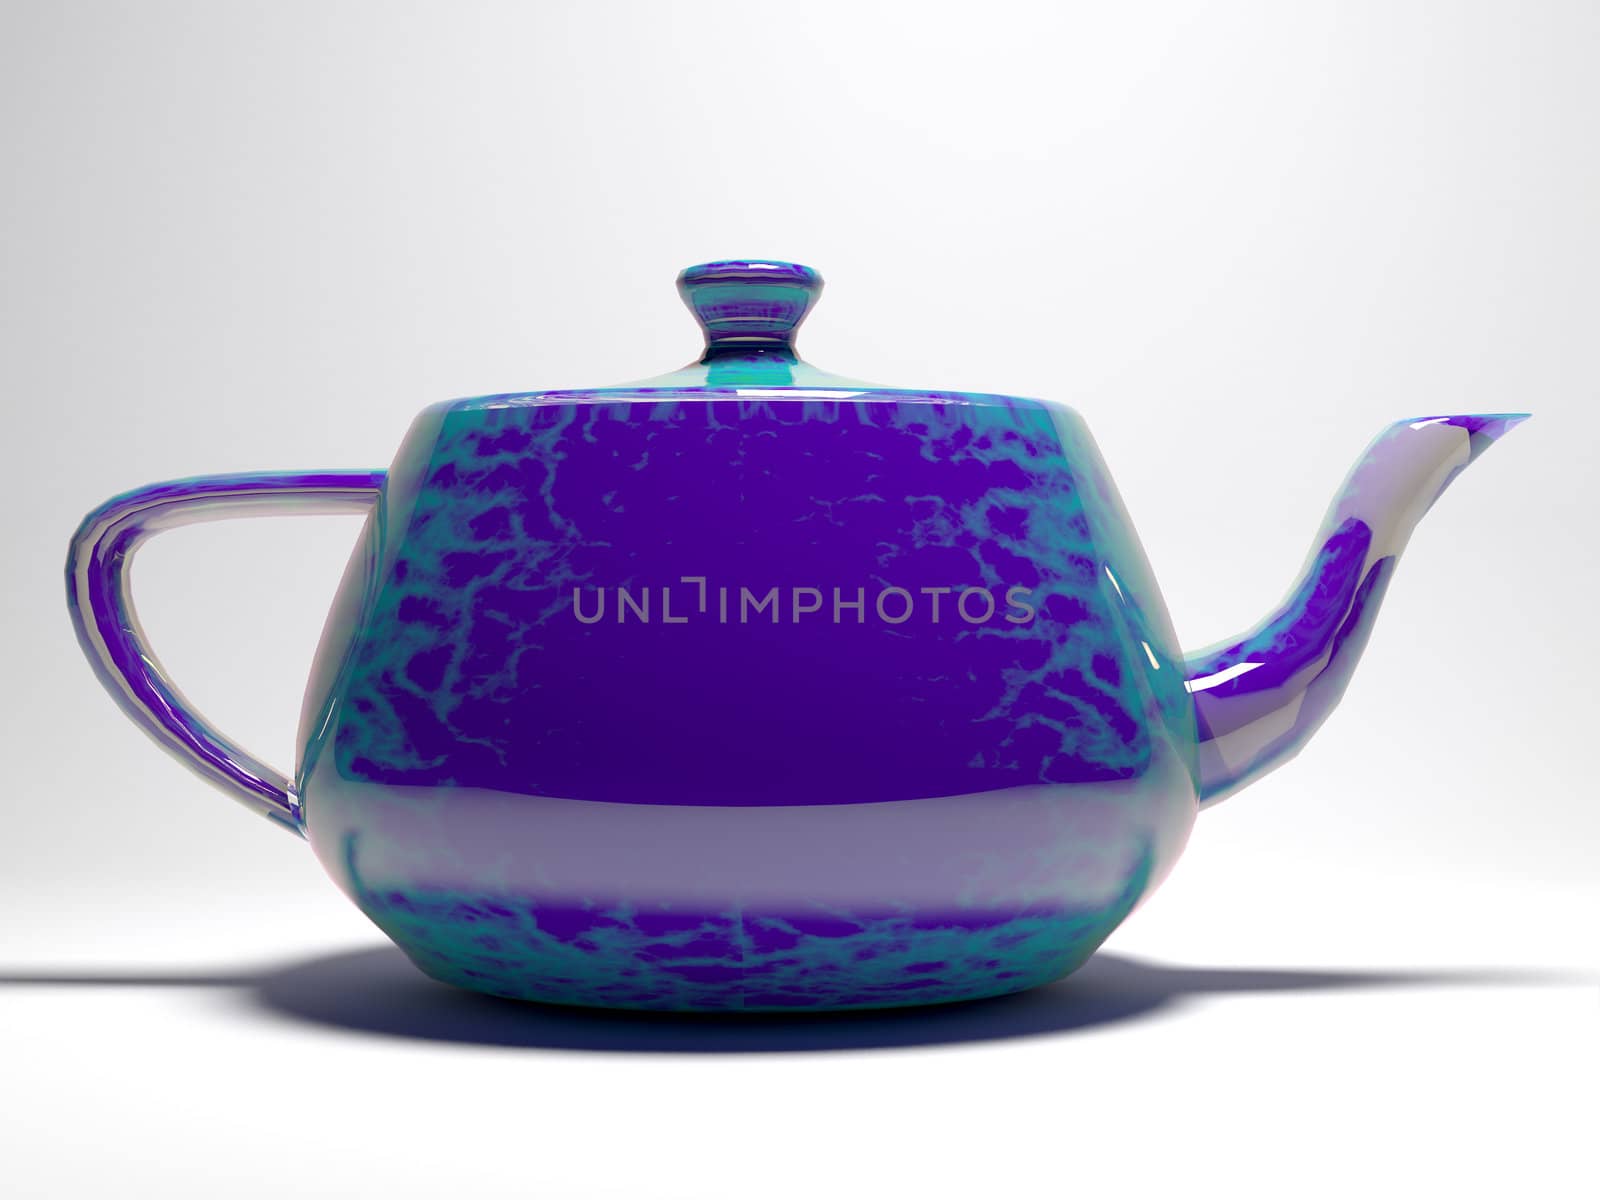 Teapot by andromeda13